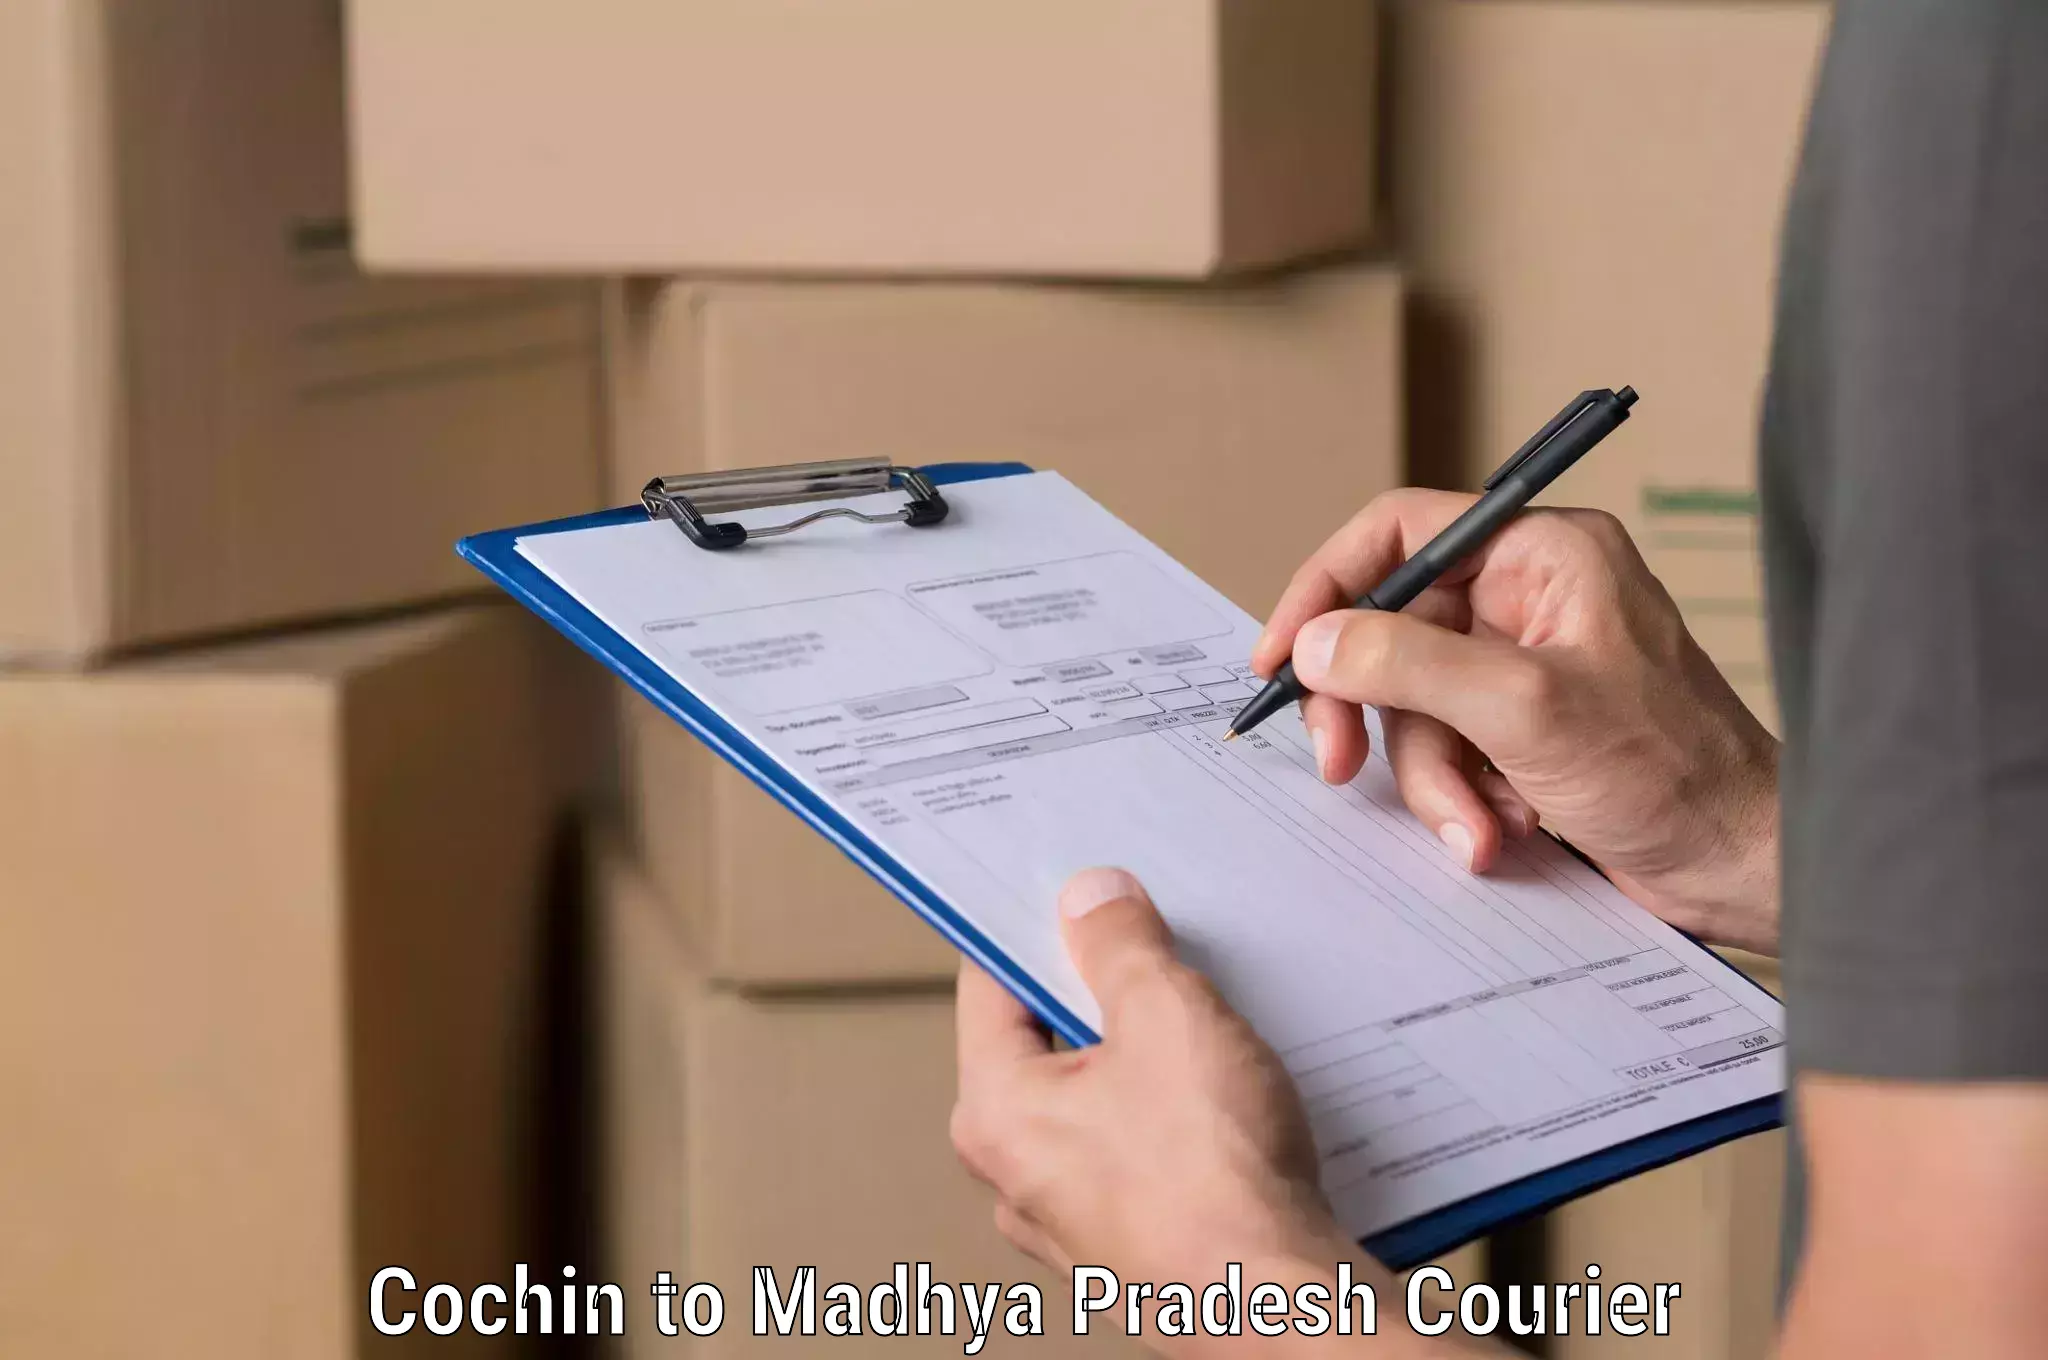 Multi-city courier Cochin to Indore